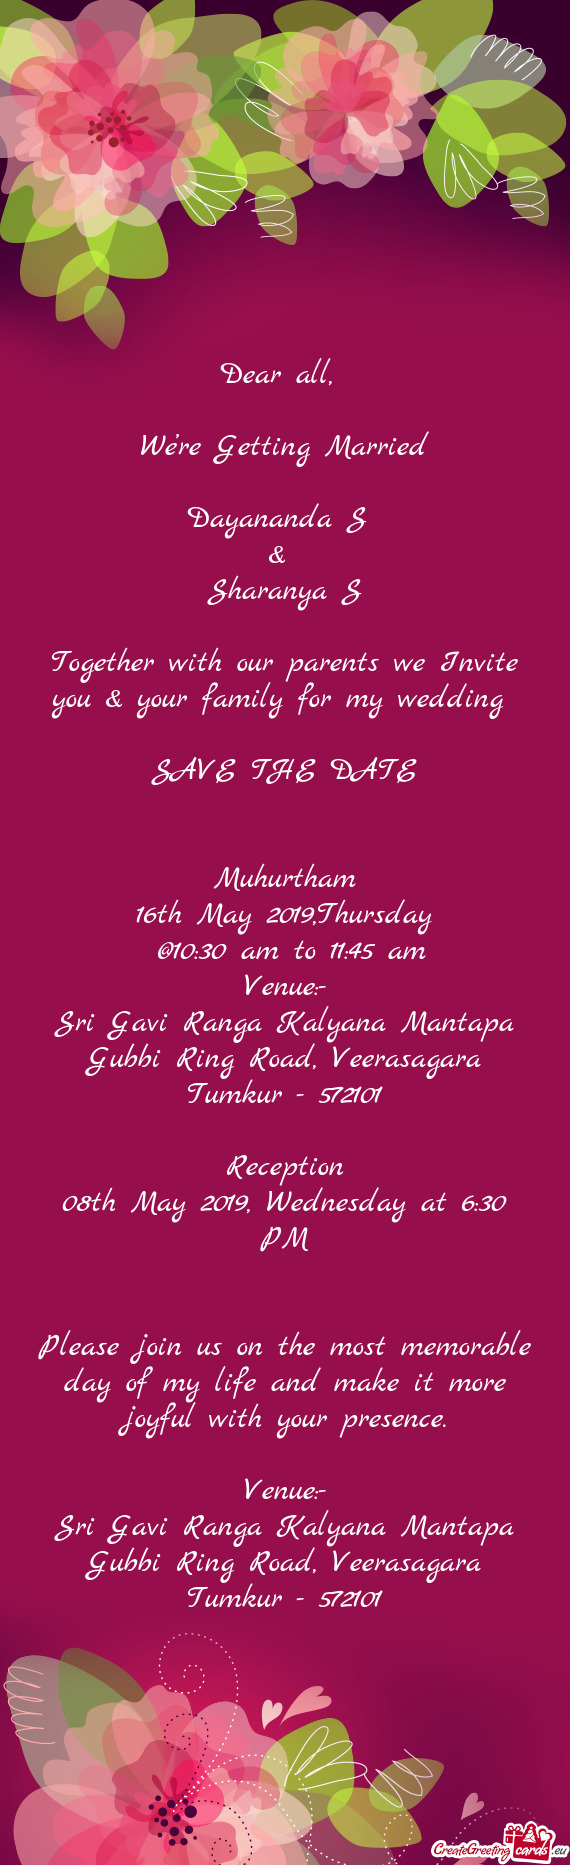 Together with our parents we Invite you & your family for my wedding 